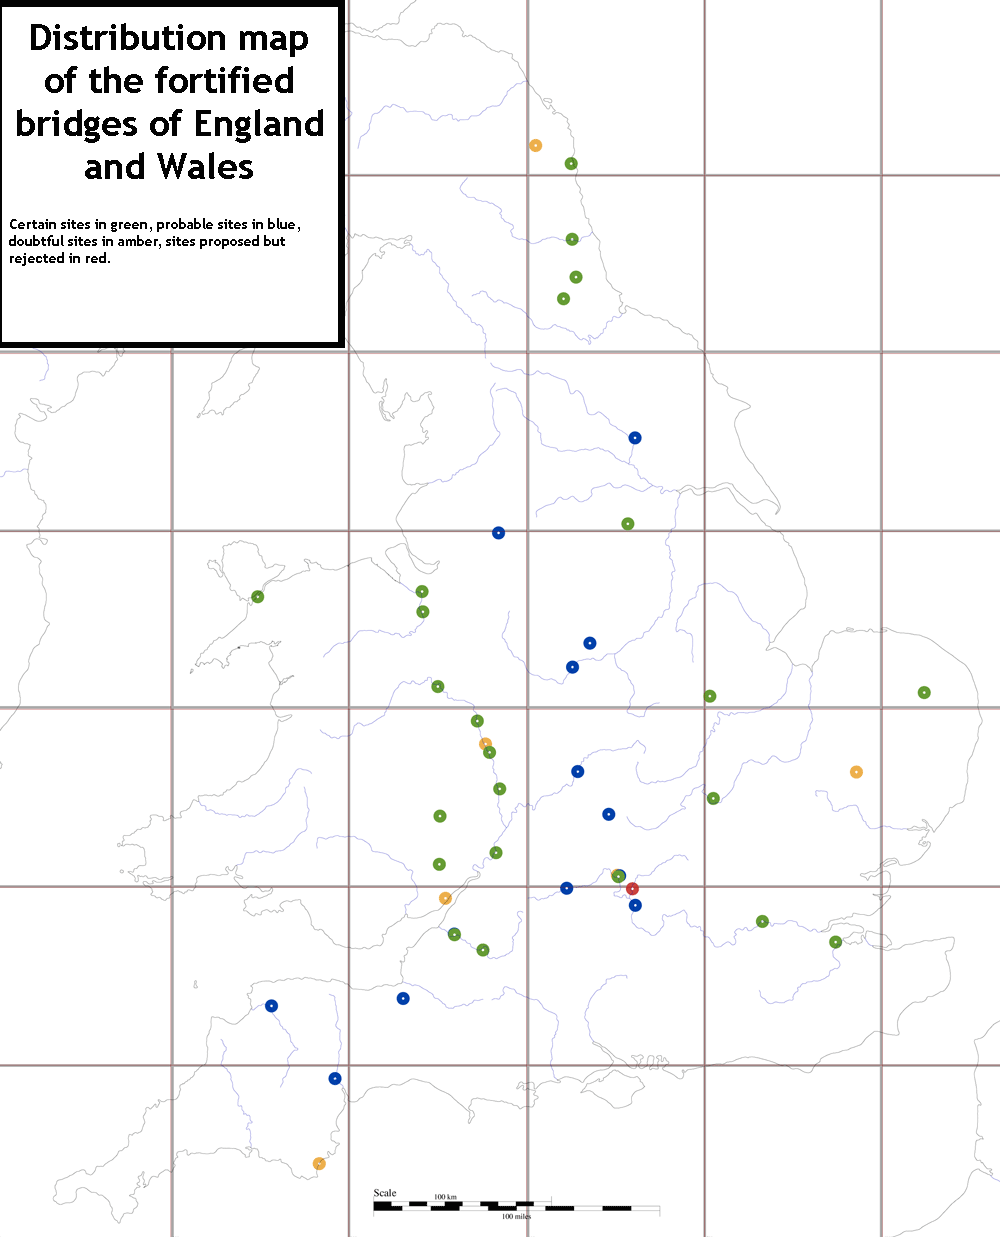 Distribution map of fortified bridges